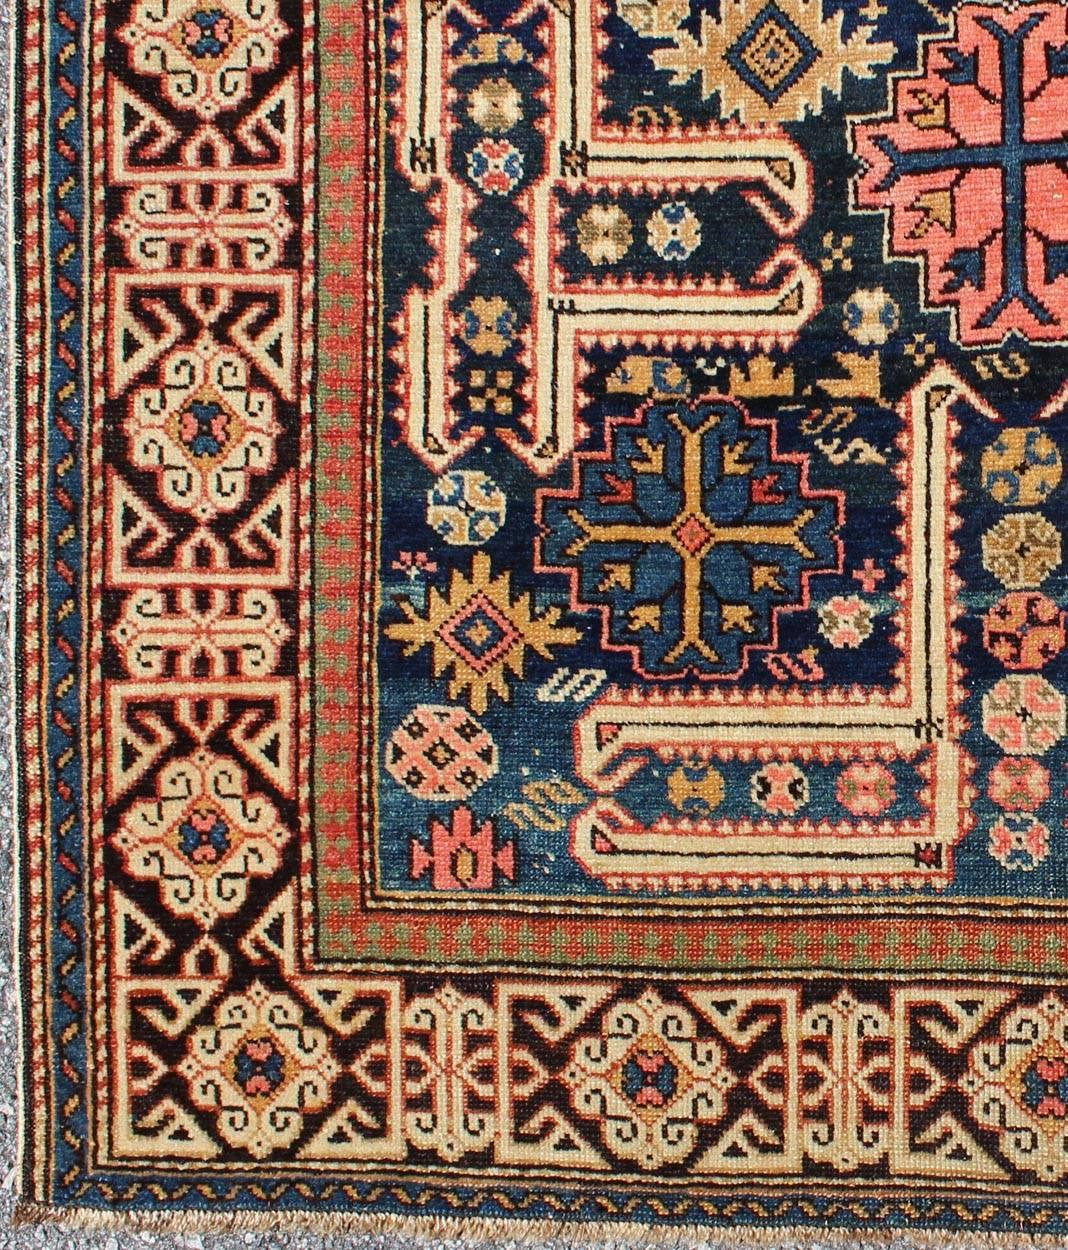 The archetypal motifs in this piece are accompanied by a tower of stacked polygons with small V-shaped indentations, a Karaghashli rug hallmark. Each decorative foil is embellished with eight-armed brackets and tiny lozenge-shaped accents. Isolated